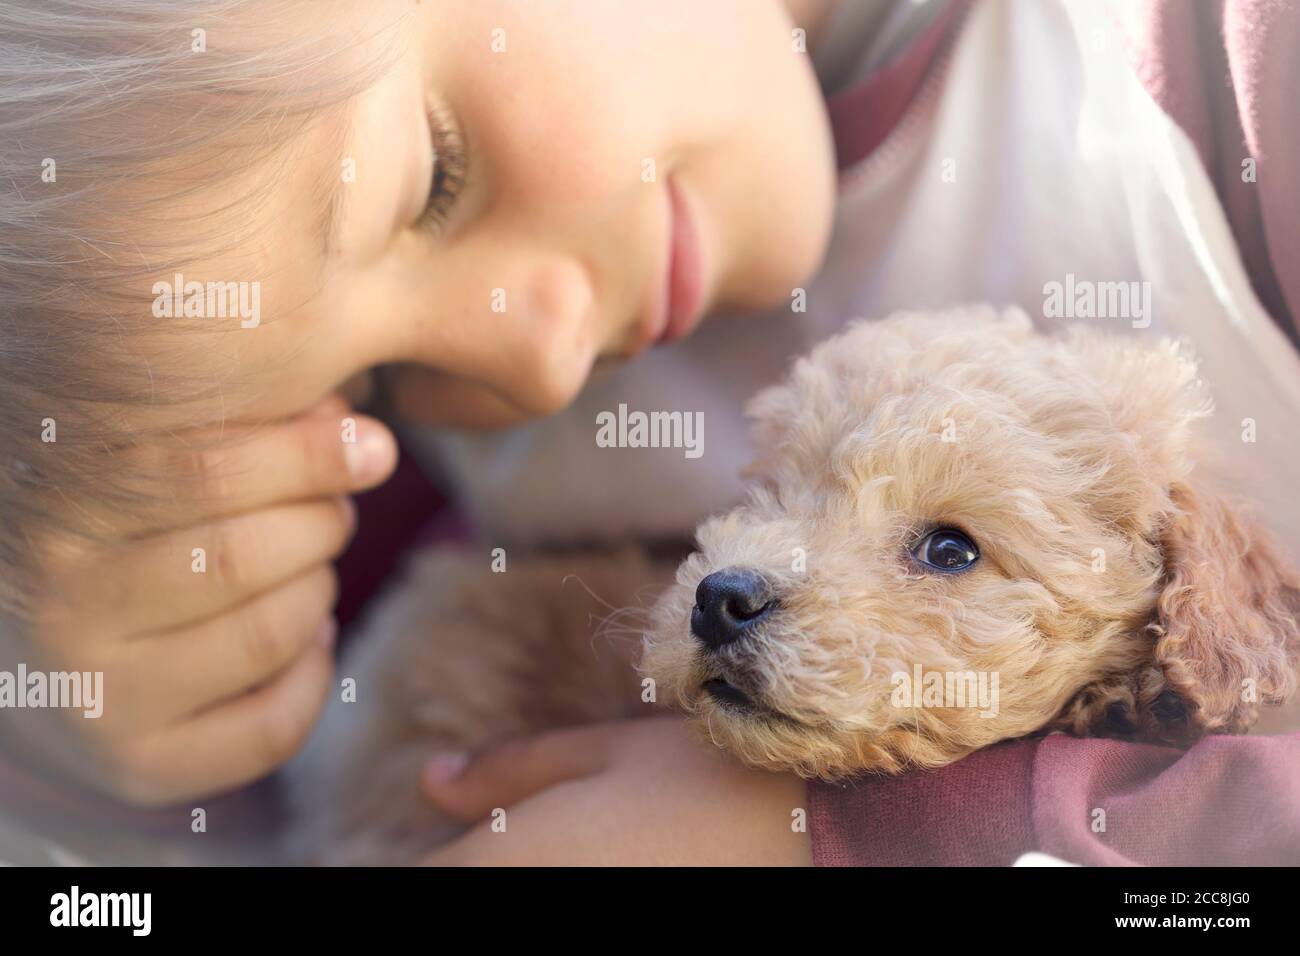 A magical moment of sweetness between a puppy of a man and a puppy dog Stock Photo